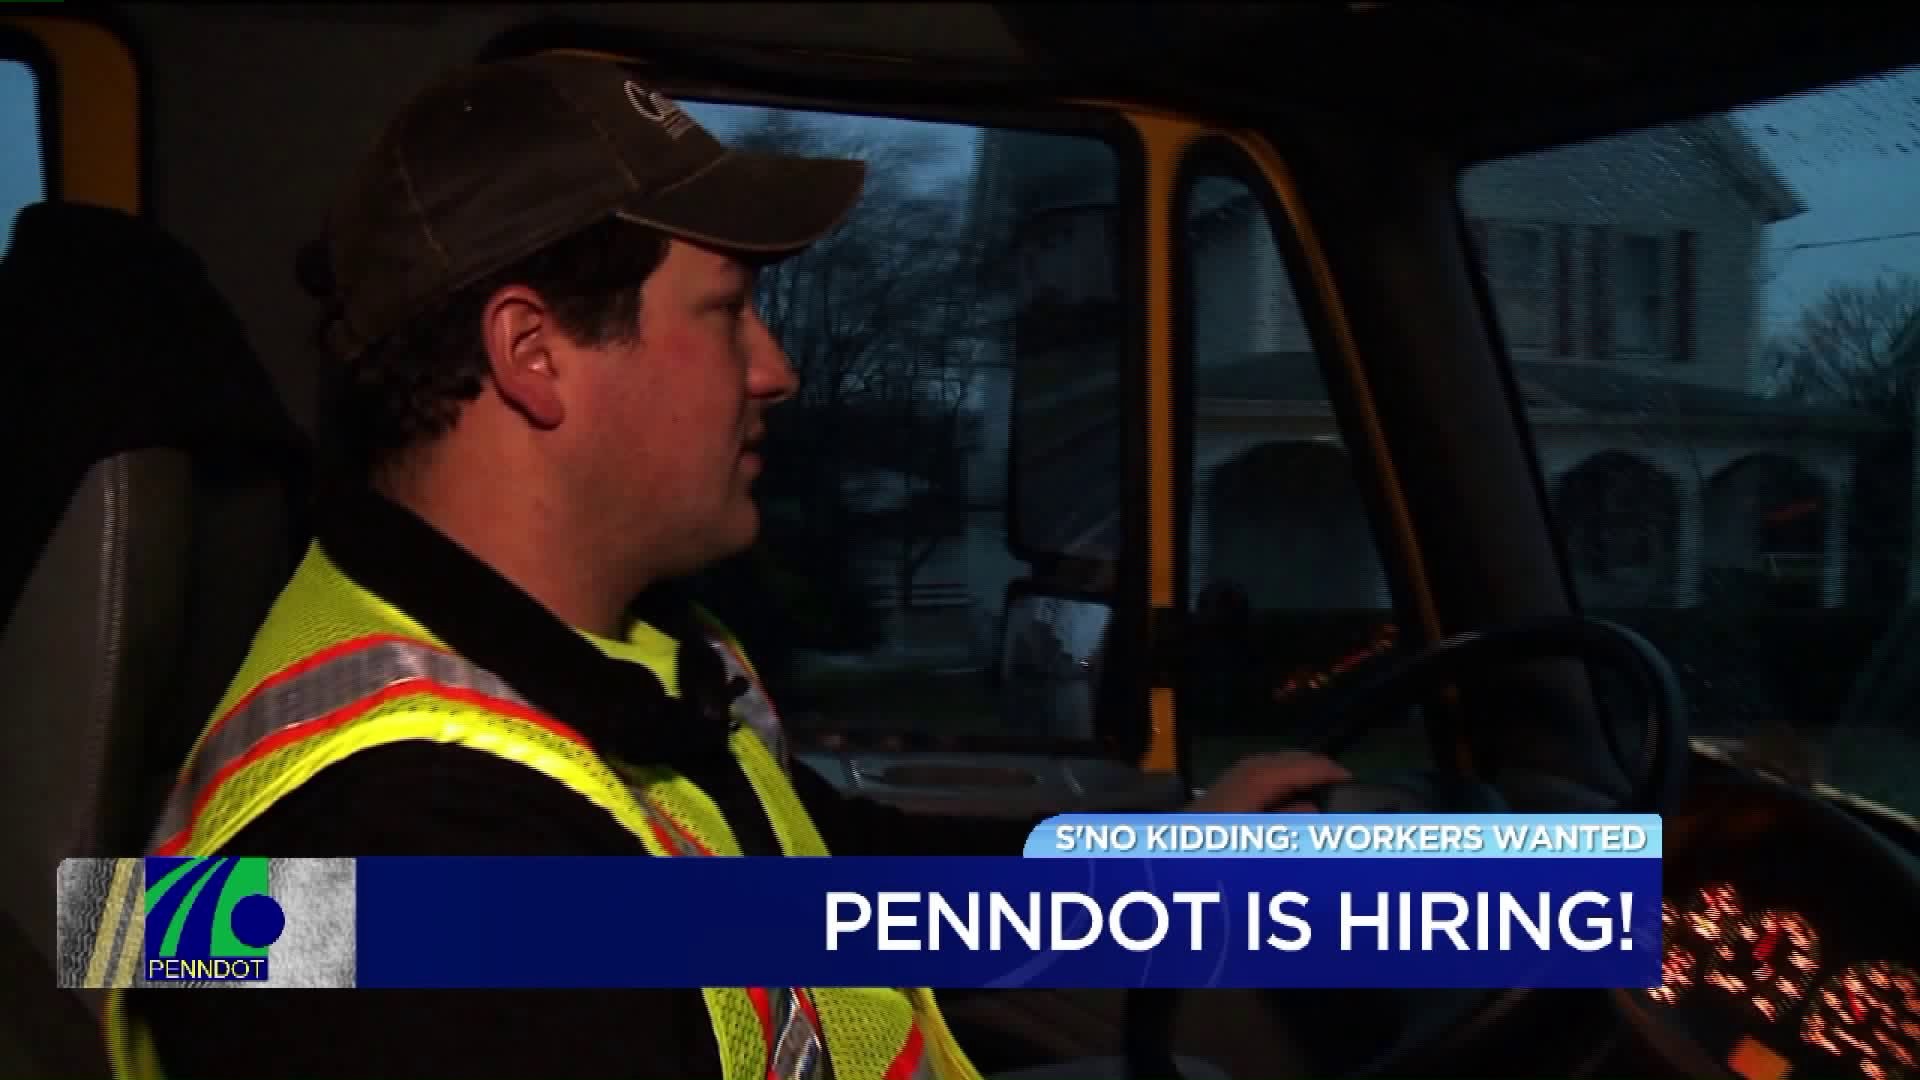 Winter Workers Wanted: PennDOT is Hiring